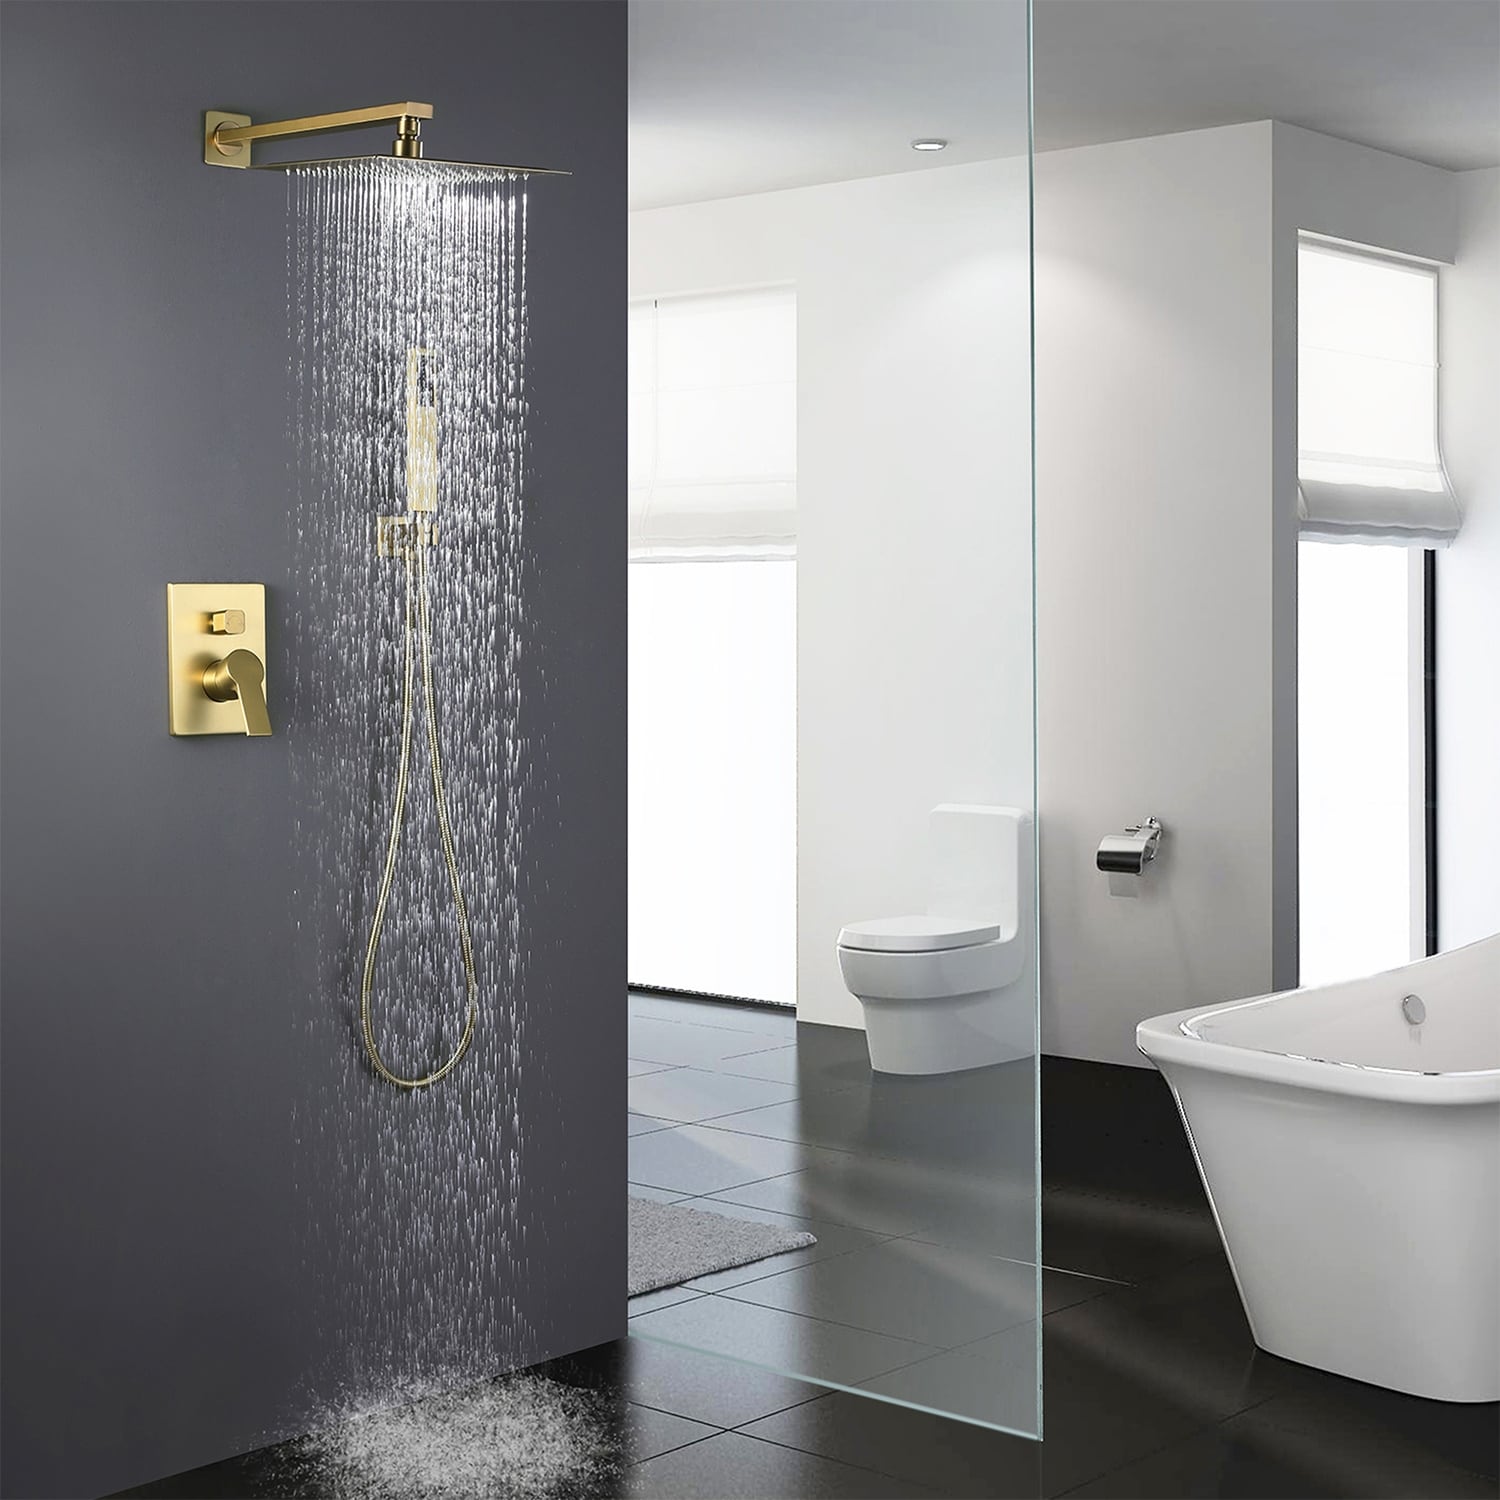 EPOWP Brushed Nickel Bathroom Shower System with Rough-In Valve